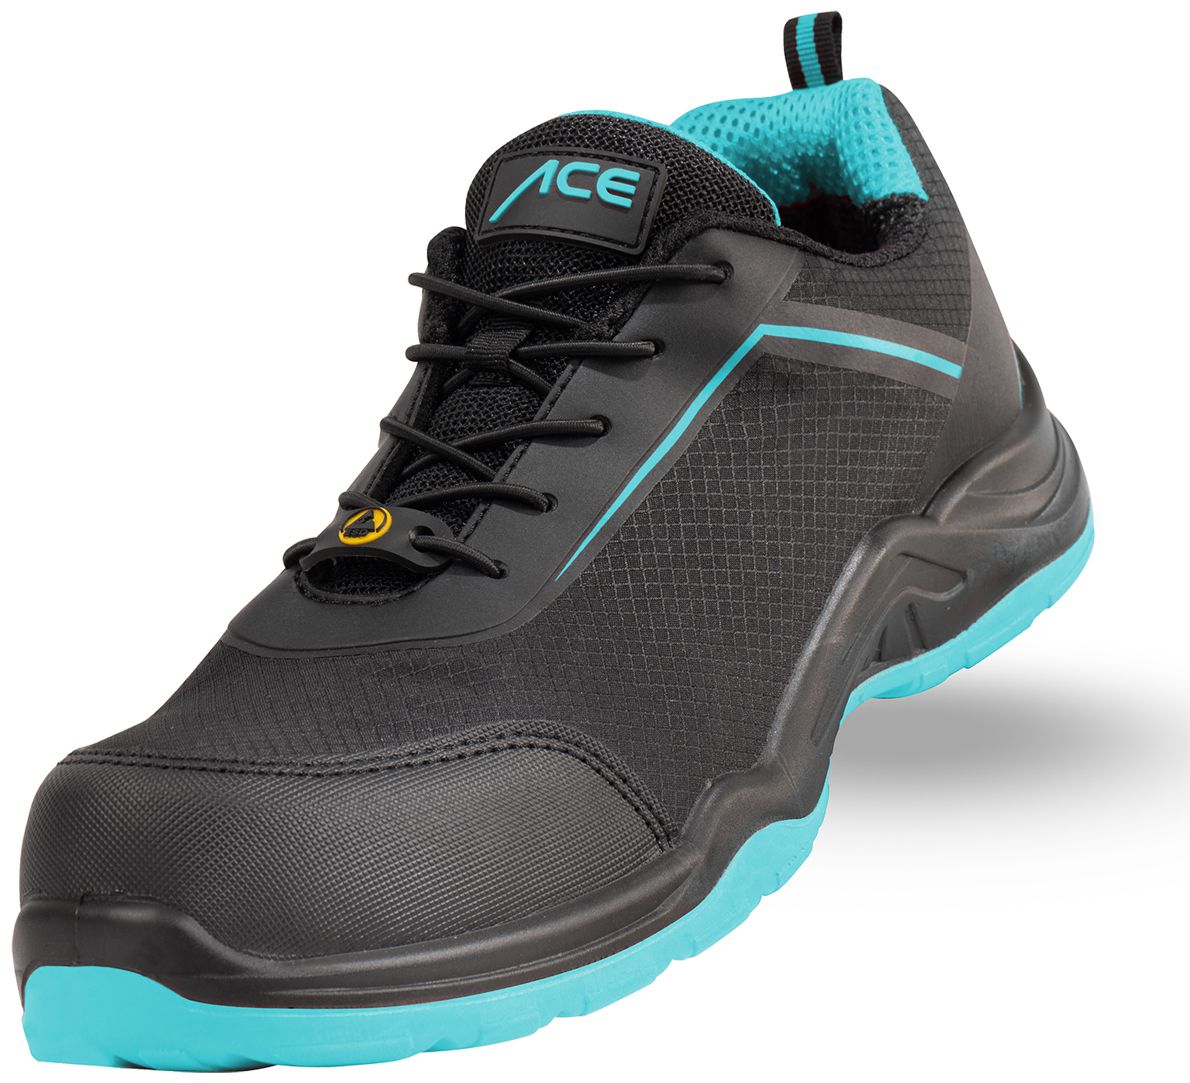 ACE Sapphire S1-P work sneakers - with plastic toe cap - safety shoes for work